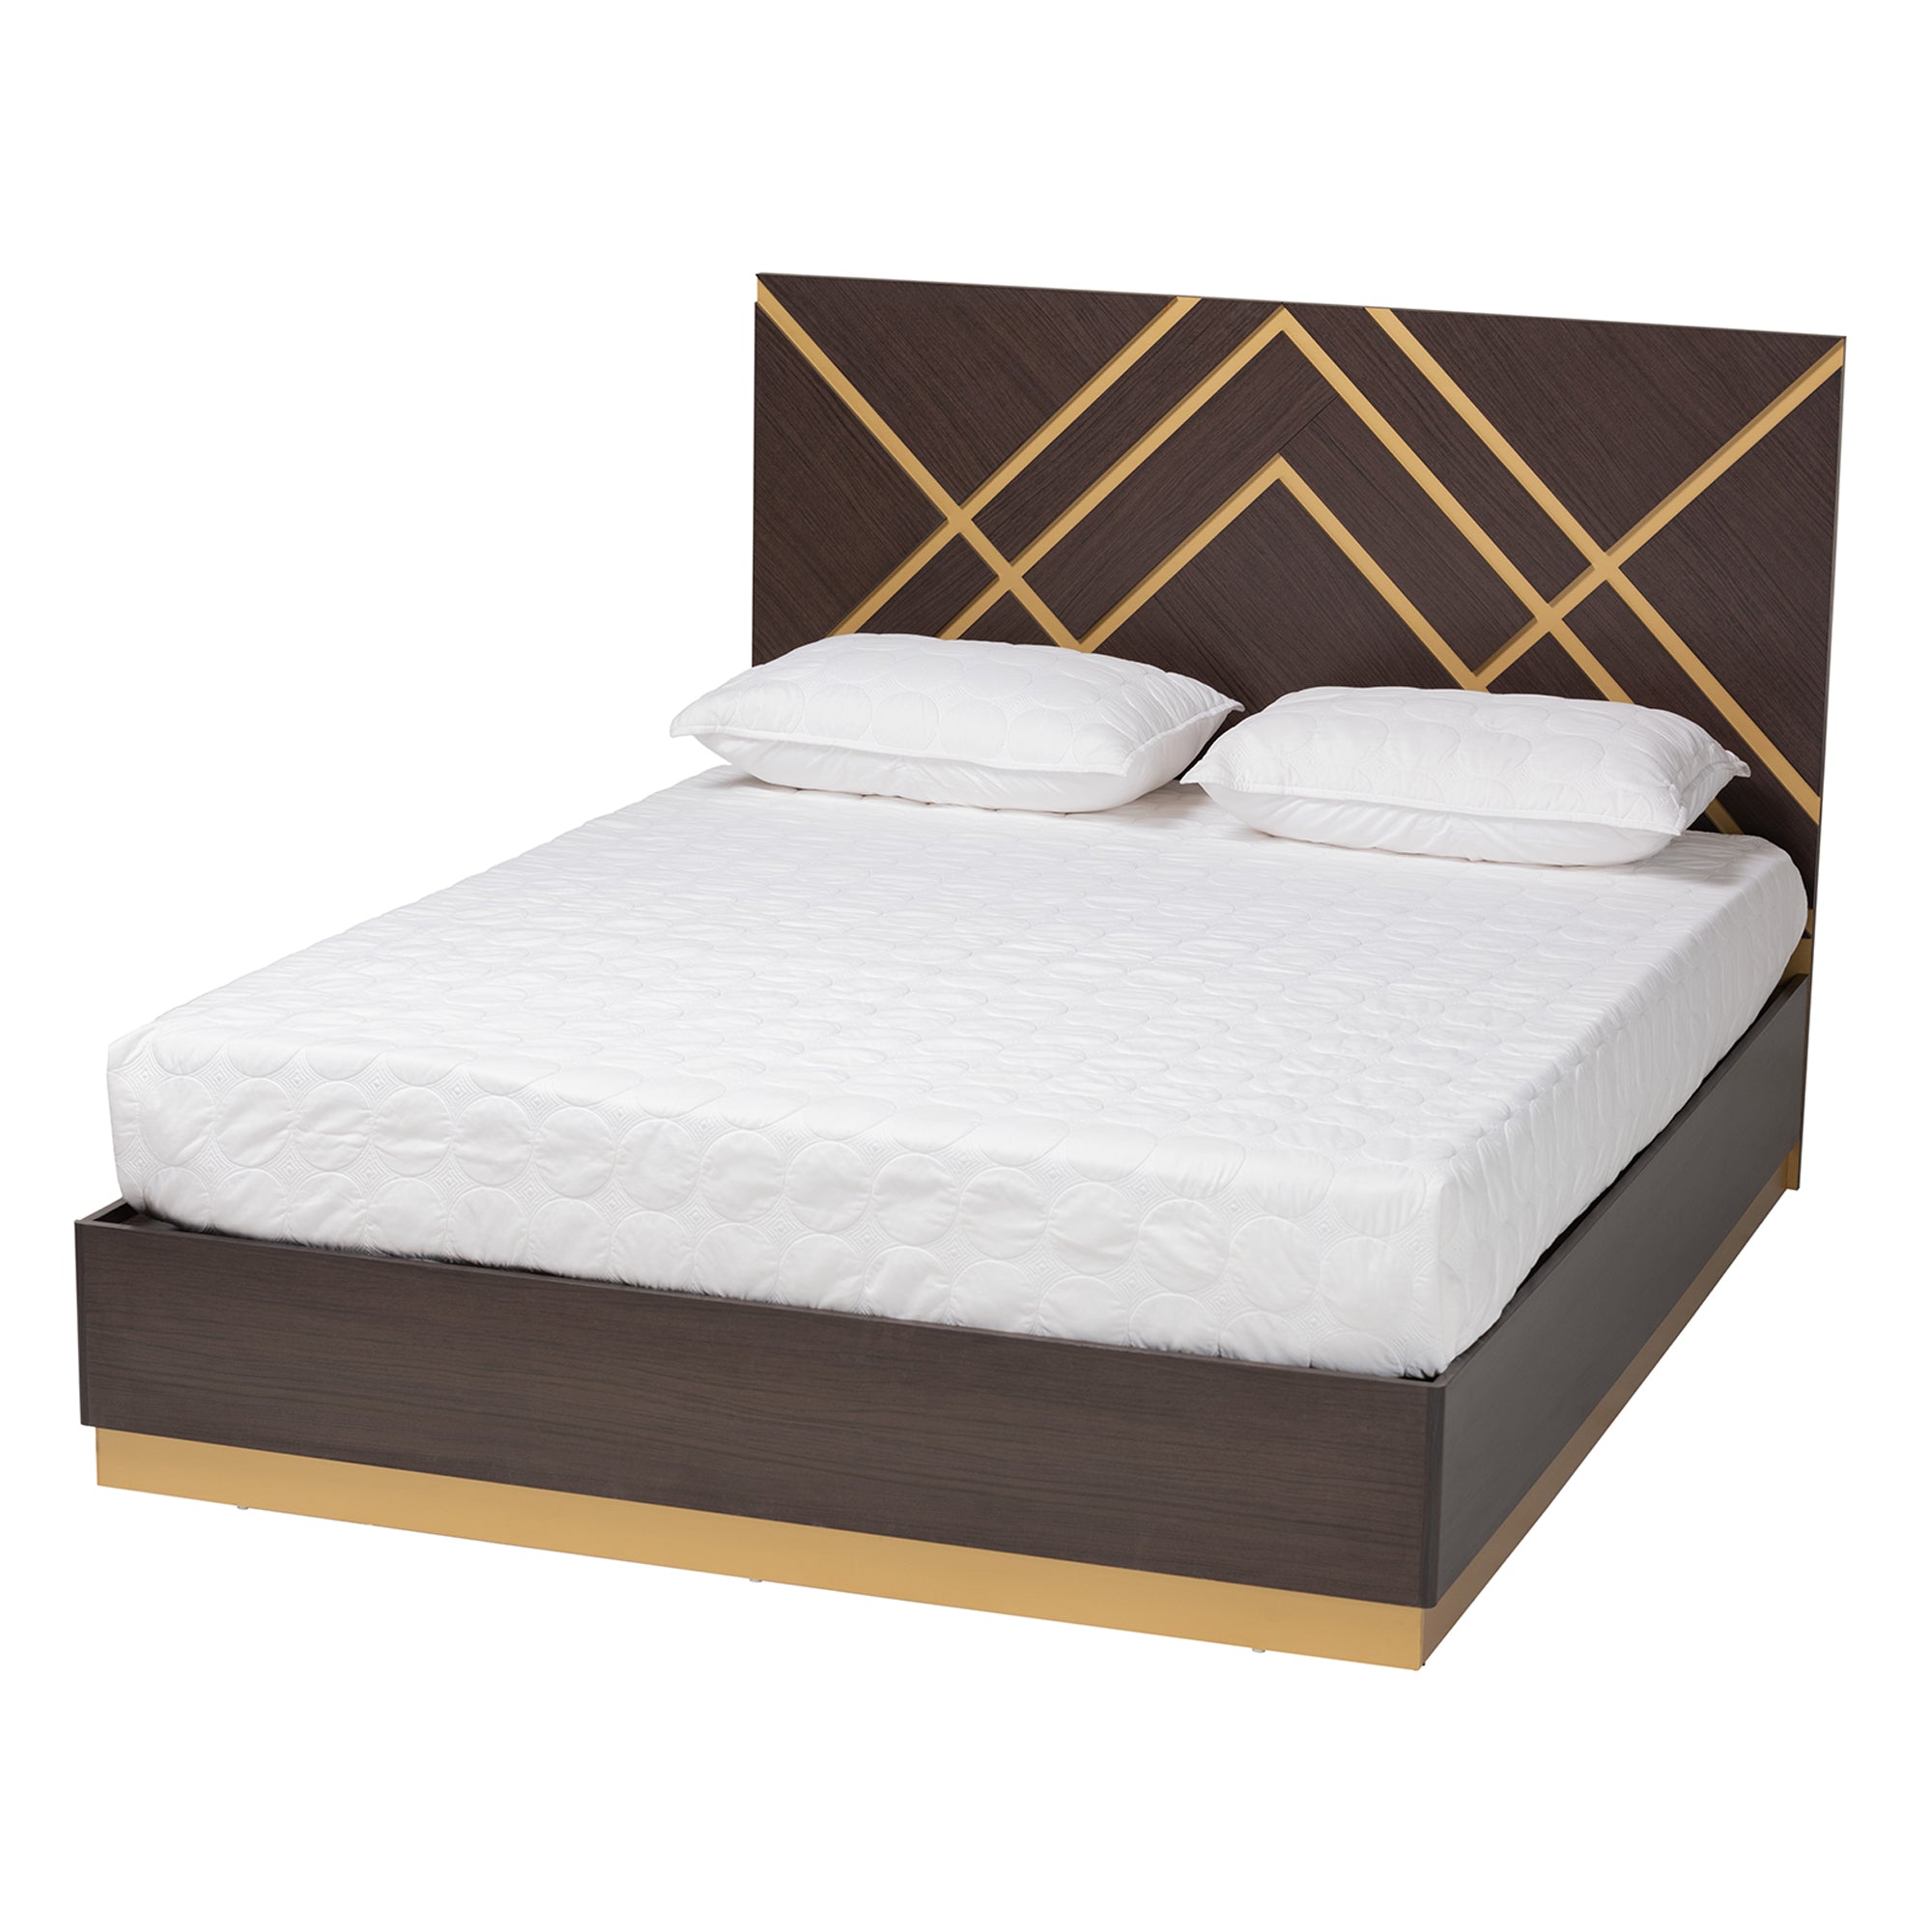 Arcelia Contemporary Bed & Nightstands & Dresser & Chest Two-Tone 5-Piece-Bedroom Set-Baxton Studio - WI-Wall2Wall Furnishings